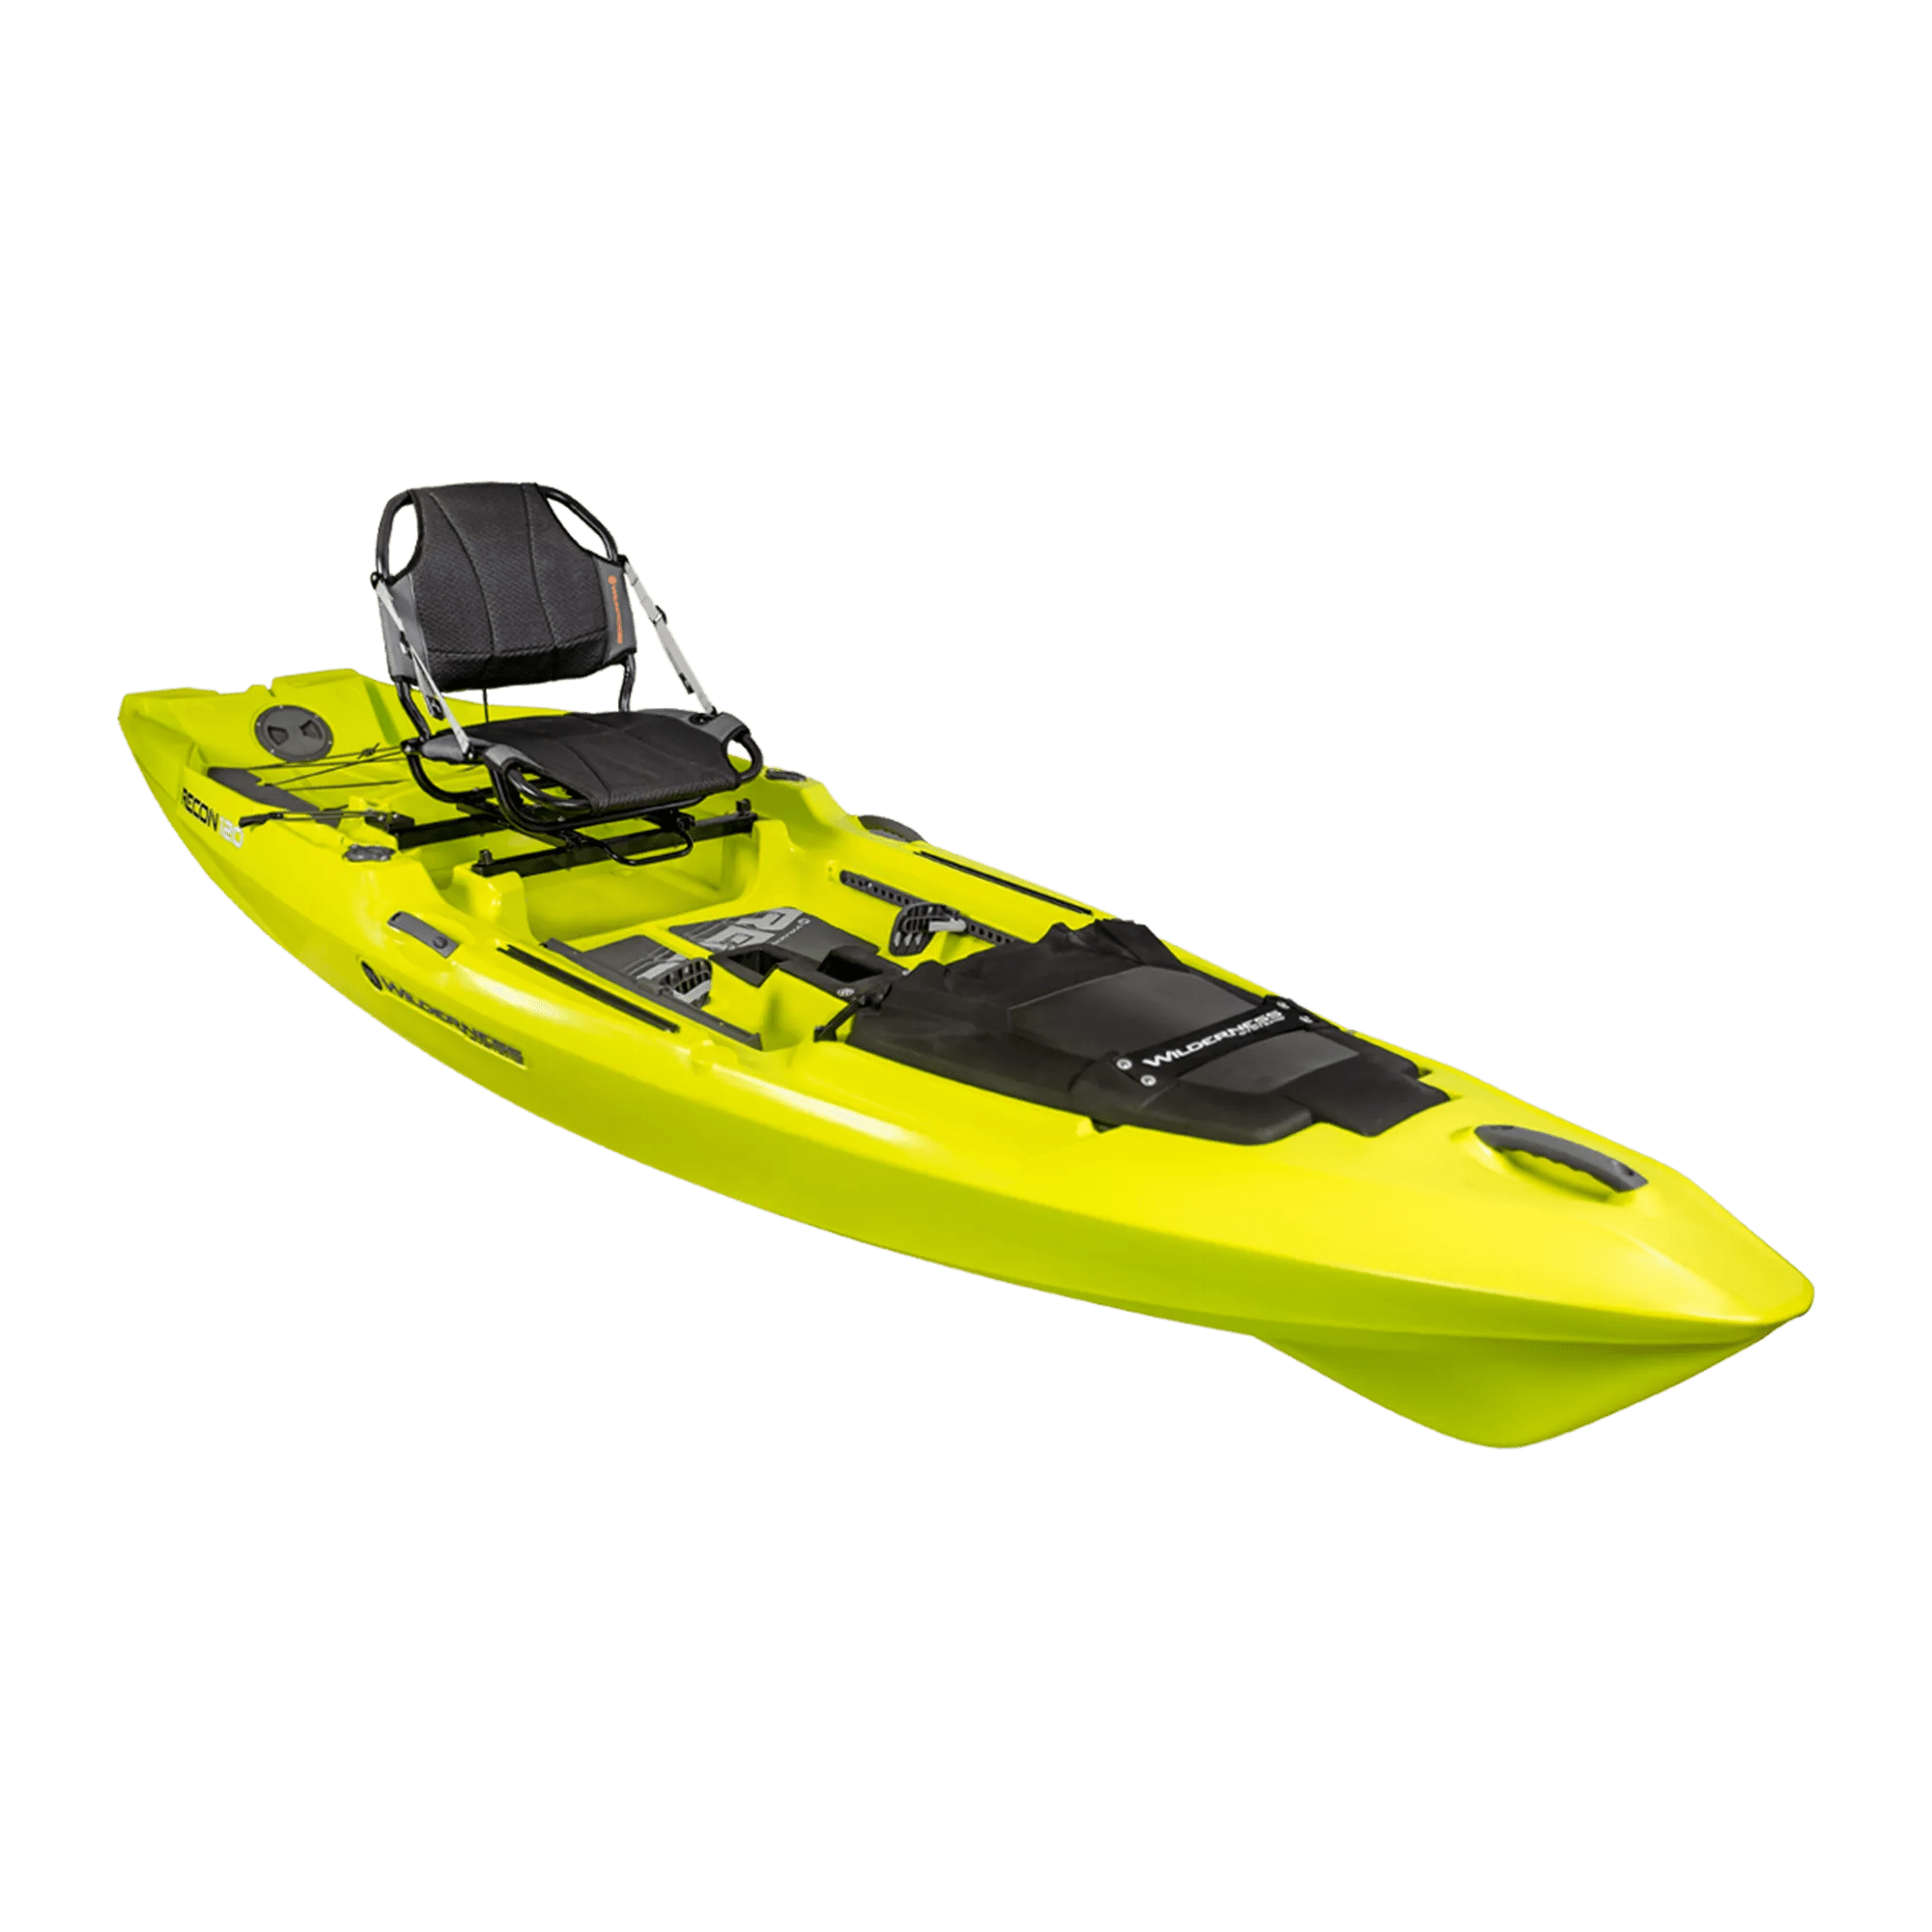 WILDERNESS SYSTEMS - Kayak de pêche Recon 120 - Yellow - 9751100180 - ISO